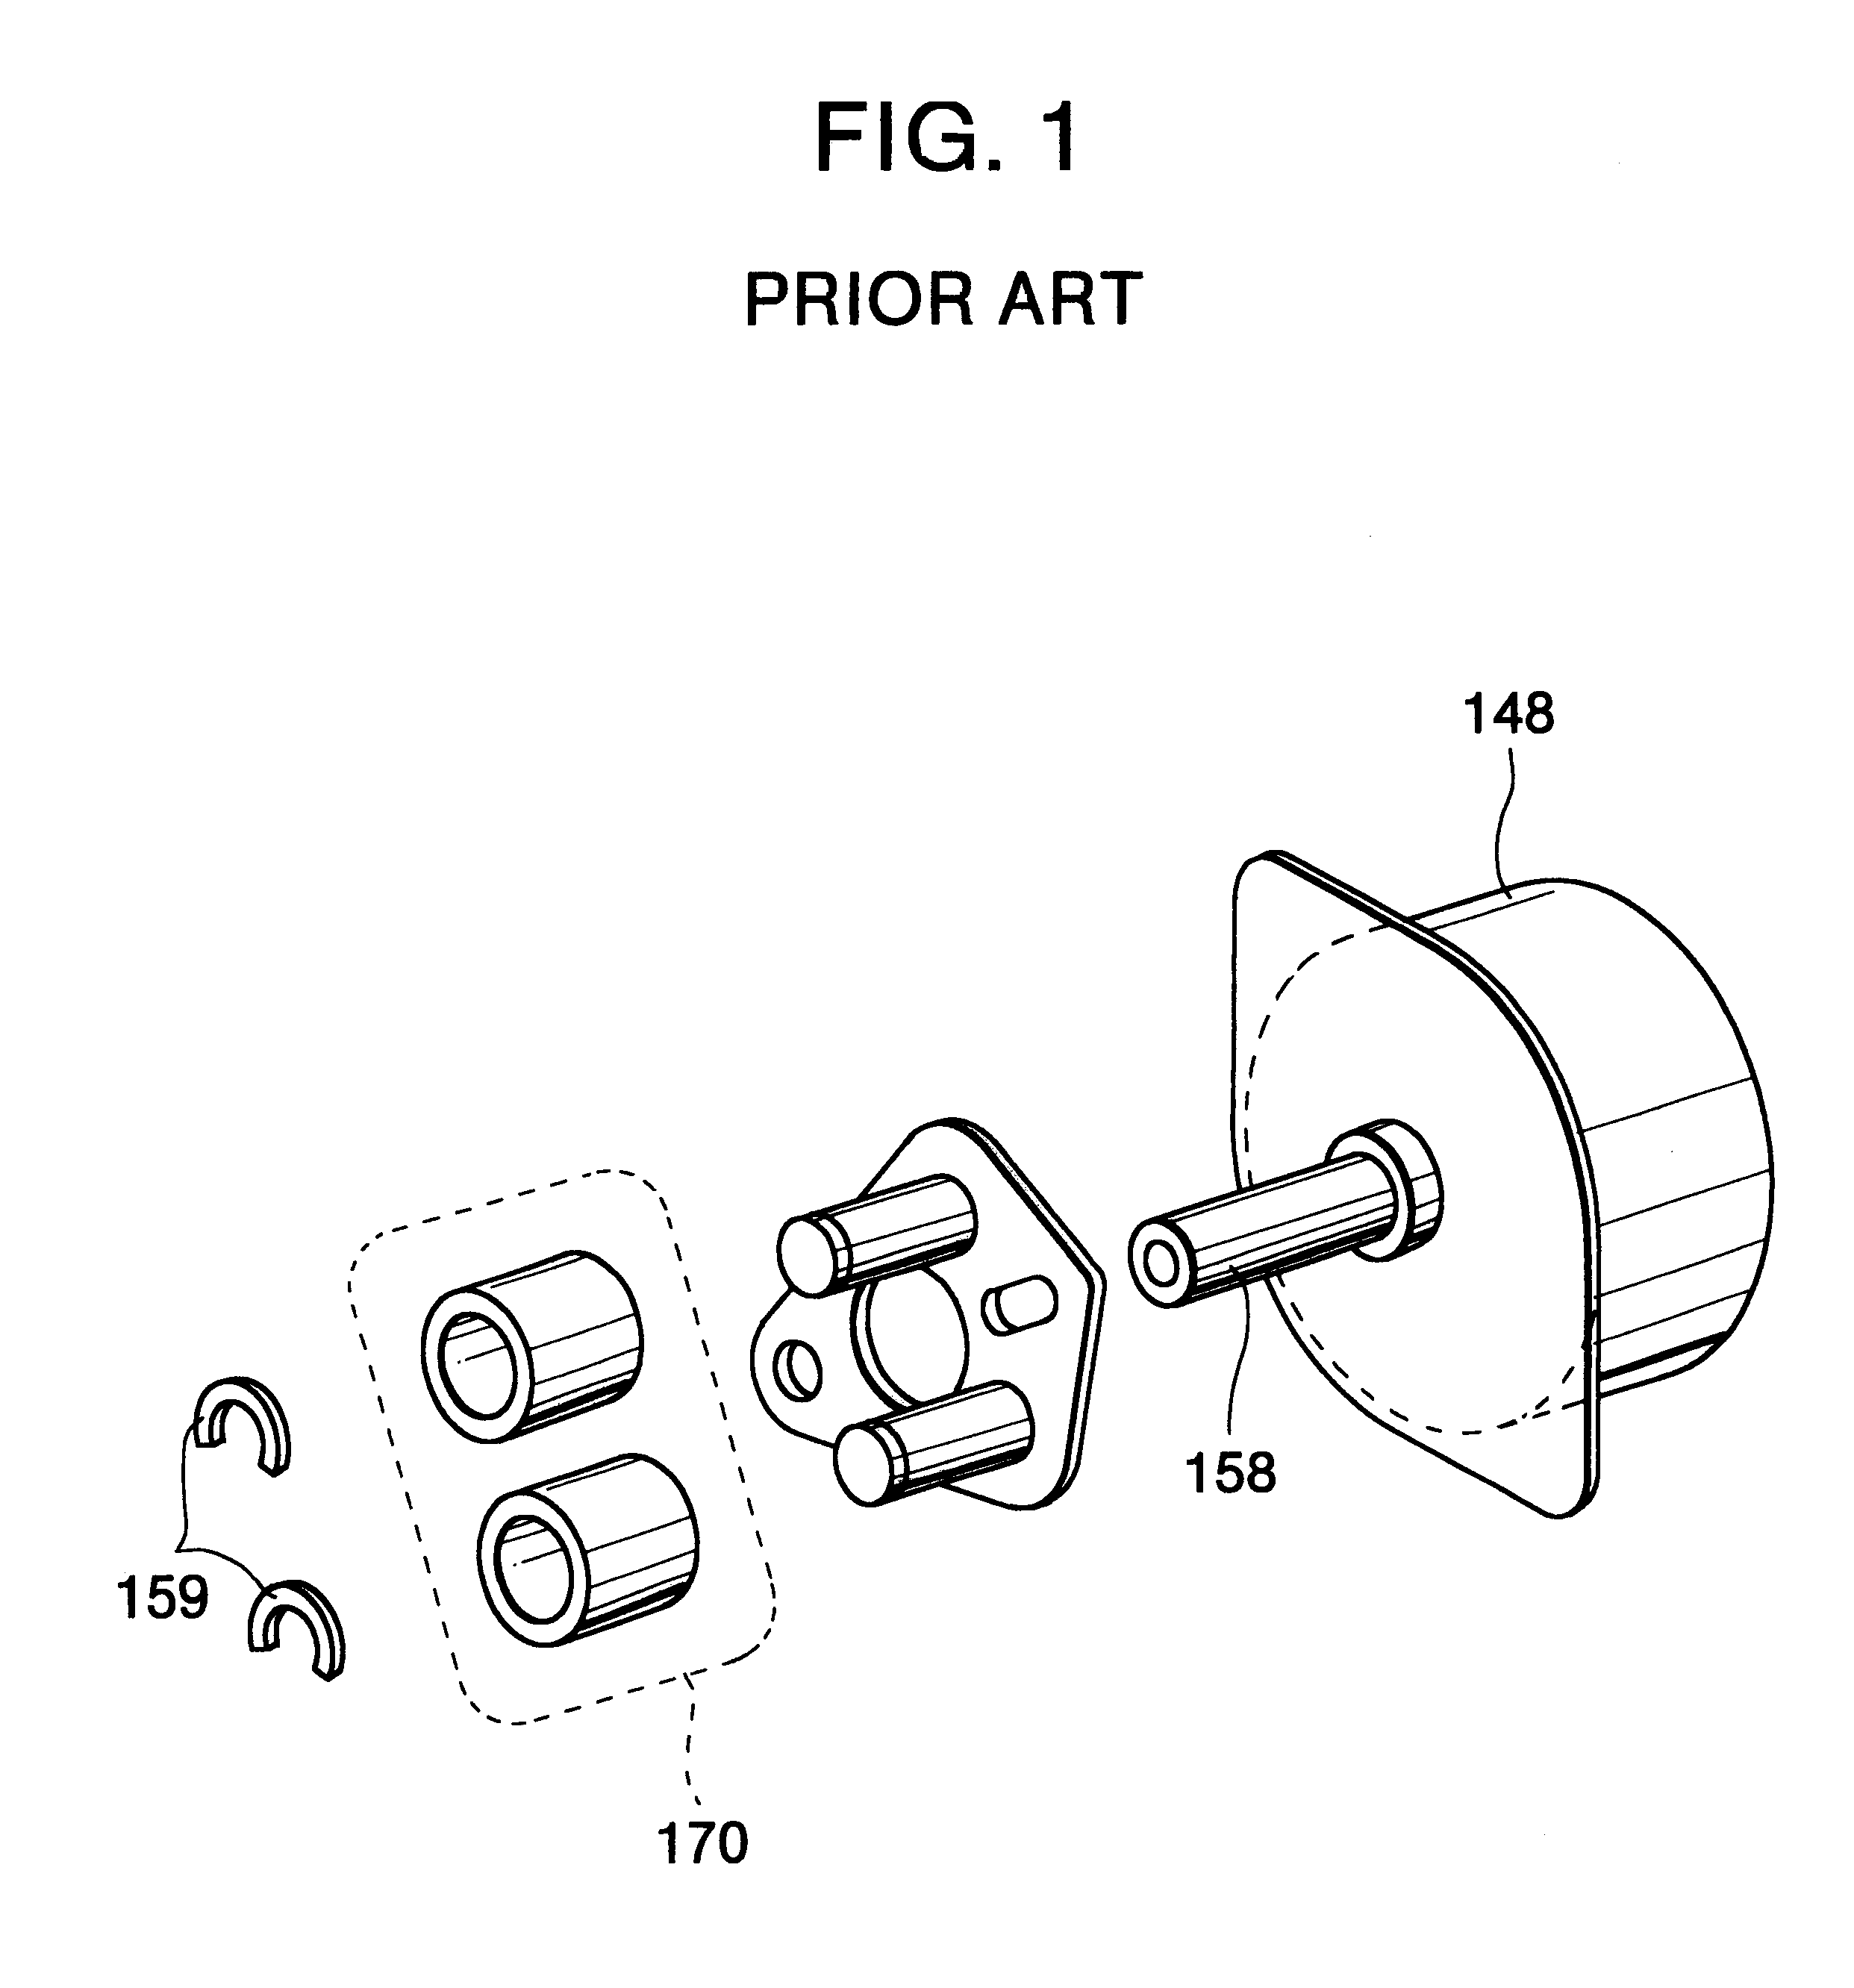 Device for supplying upper thread of sewing machine